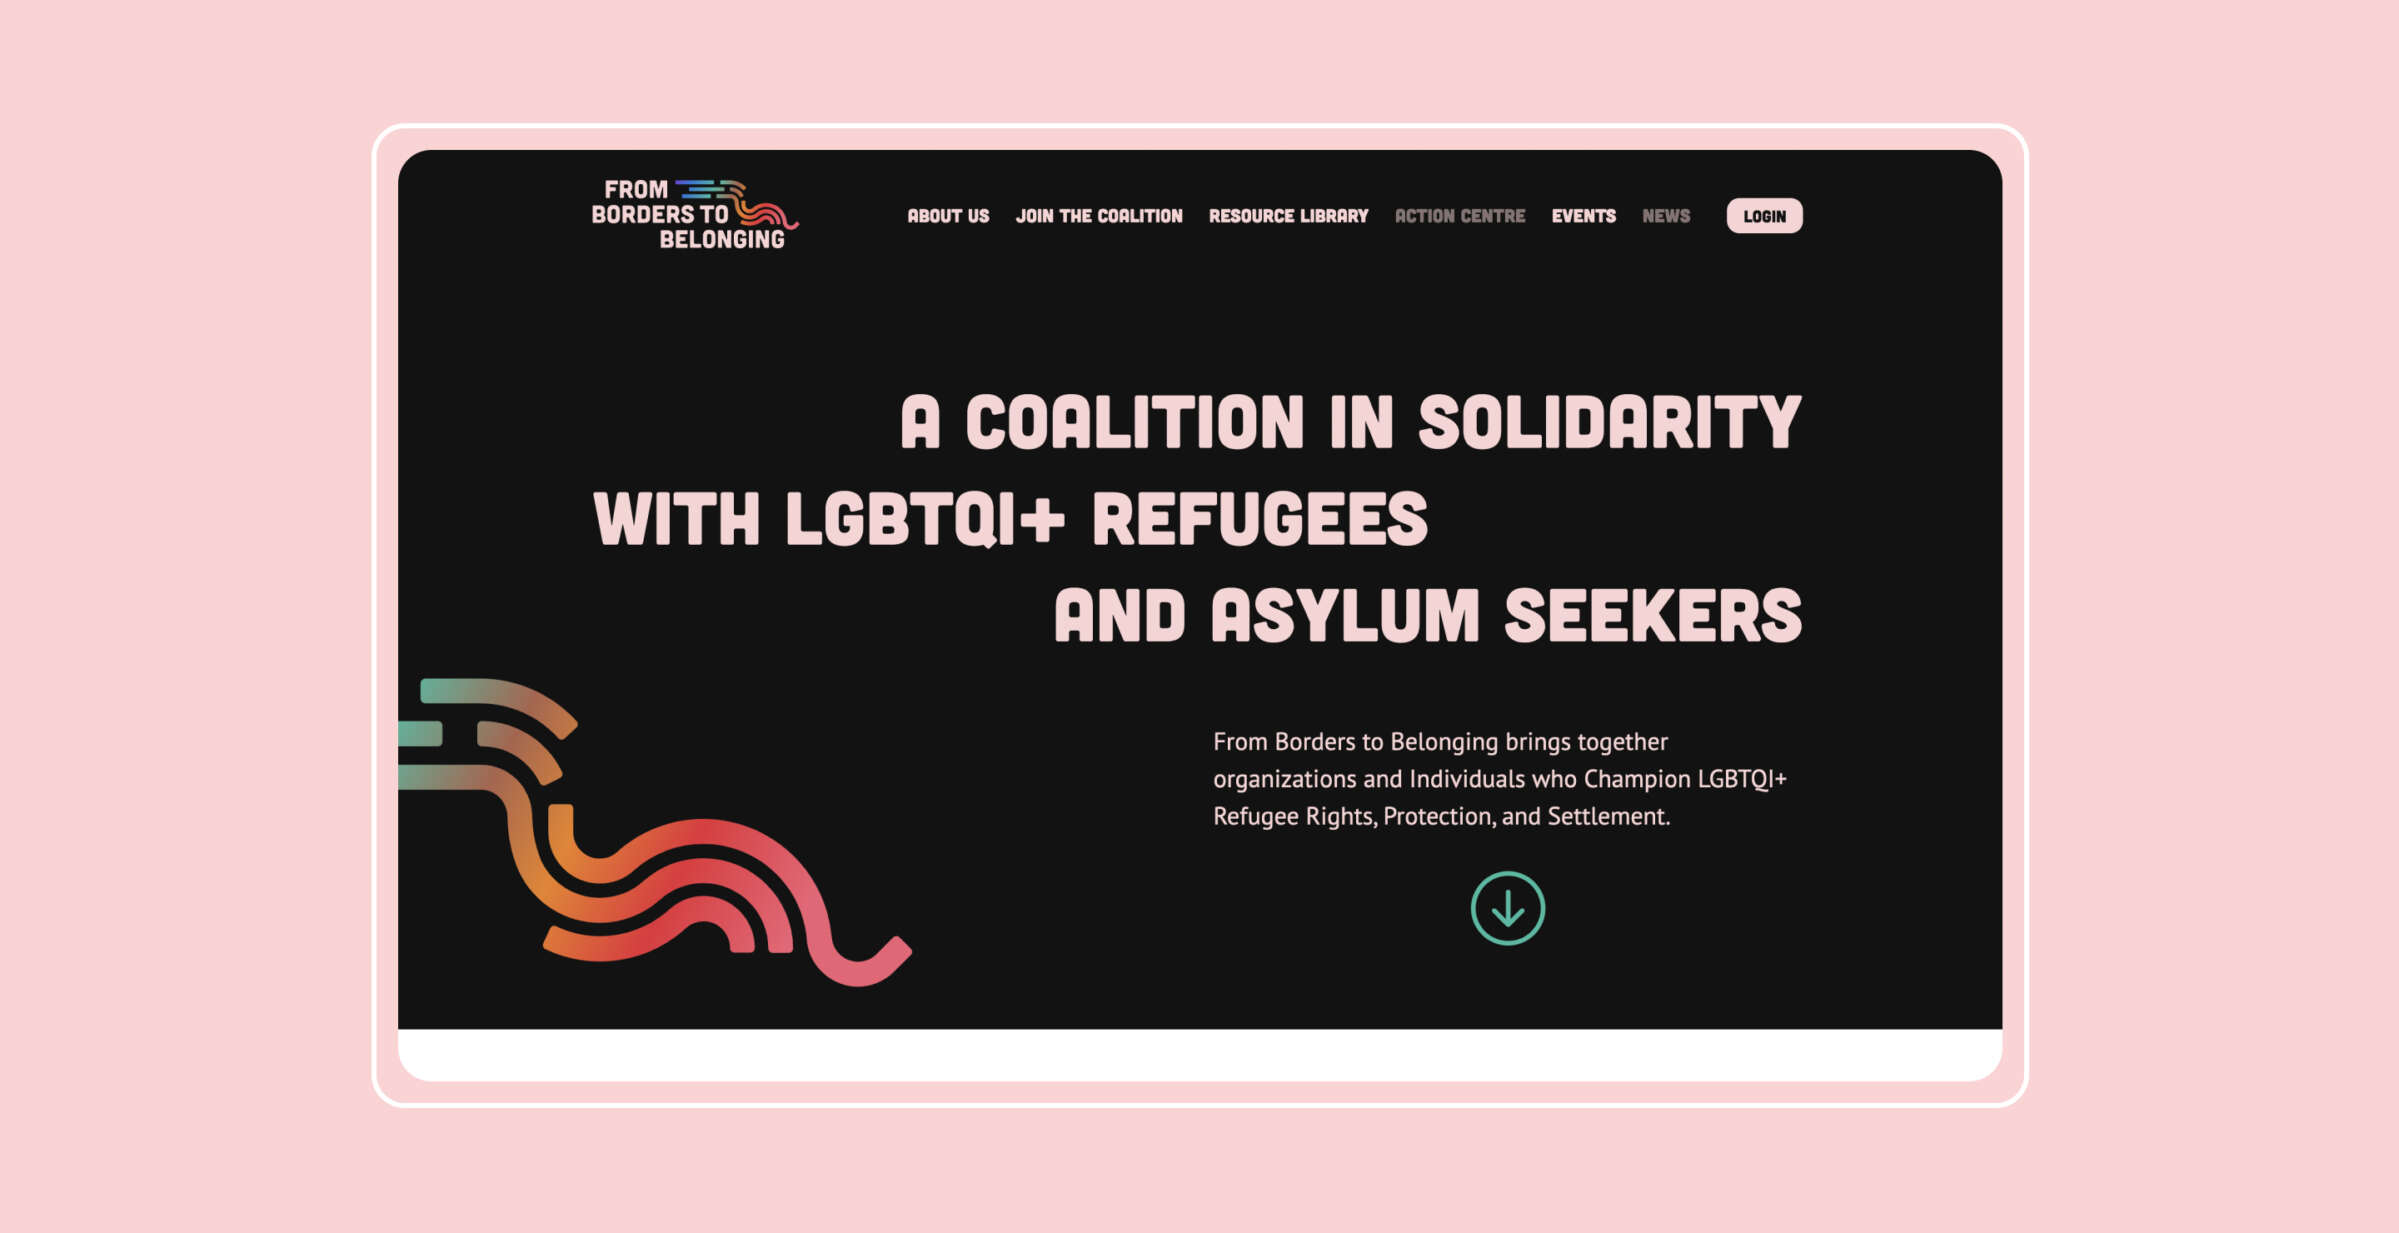 A webpage with a pink background and text that reads: "A Coalition in Solidarity with LGBTQI+ Refugees and Asylum Seekers." A description below states the coalition's mission to support organizations and individuals advocating for LGBTQI+ refugee rights, protection, and settlement.